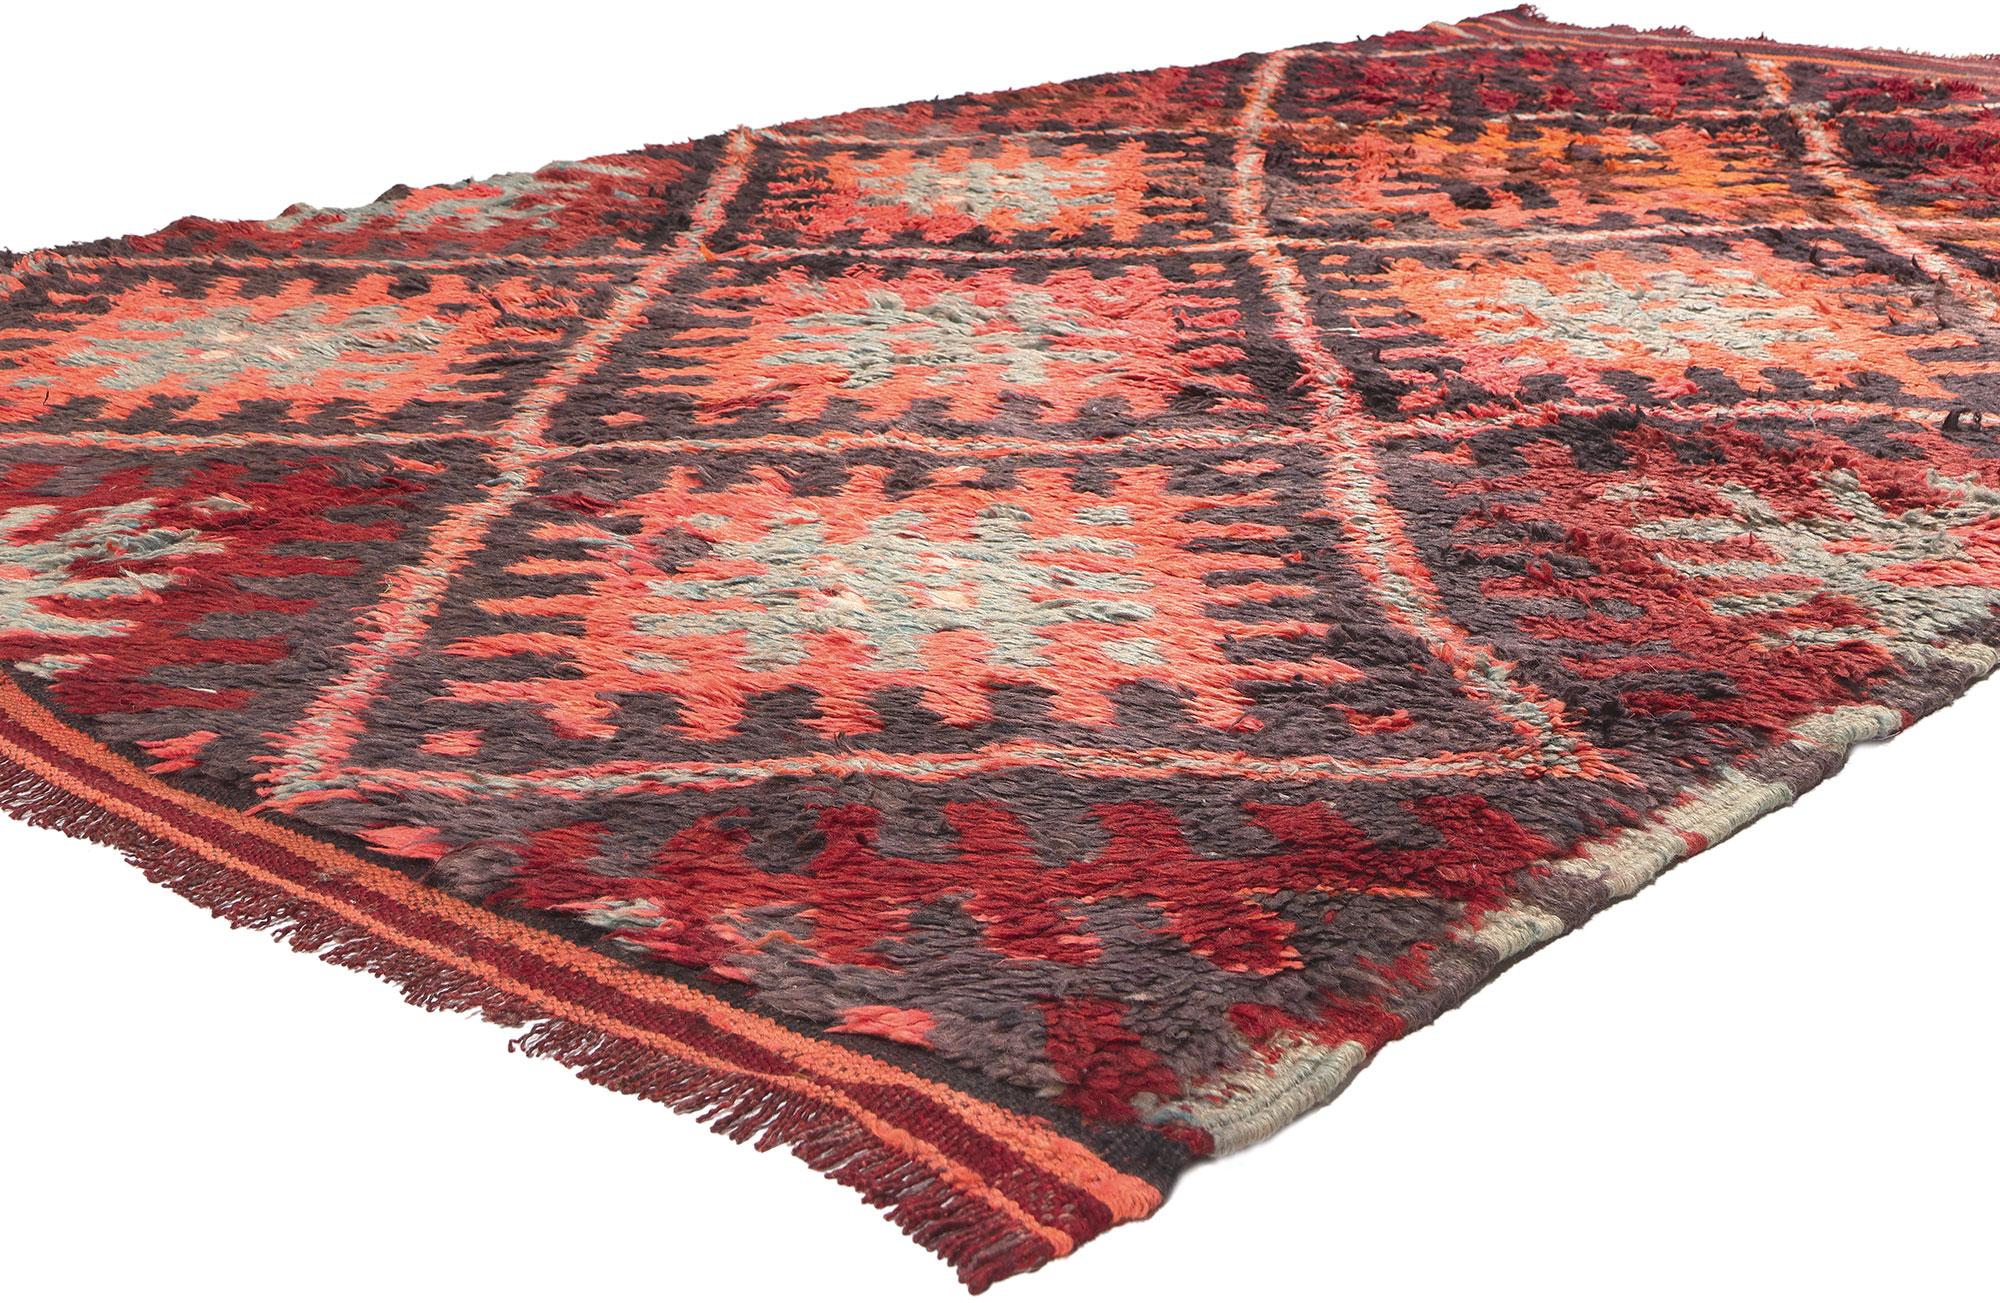 20932 Vintage Beni MGuild Moroccan Rug, 06'06 x 10'08. 

In the realm where Midcentury Modern chic embraces nomadic allure, meet this hand-knotted wool vintage Beni Mguild Moroccan rug—a gem from the western central Middle Atlas, meticulously